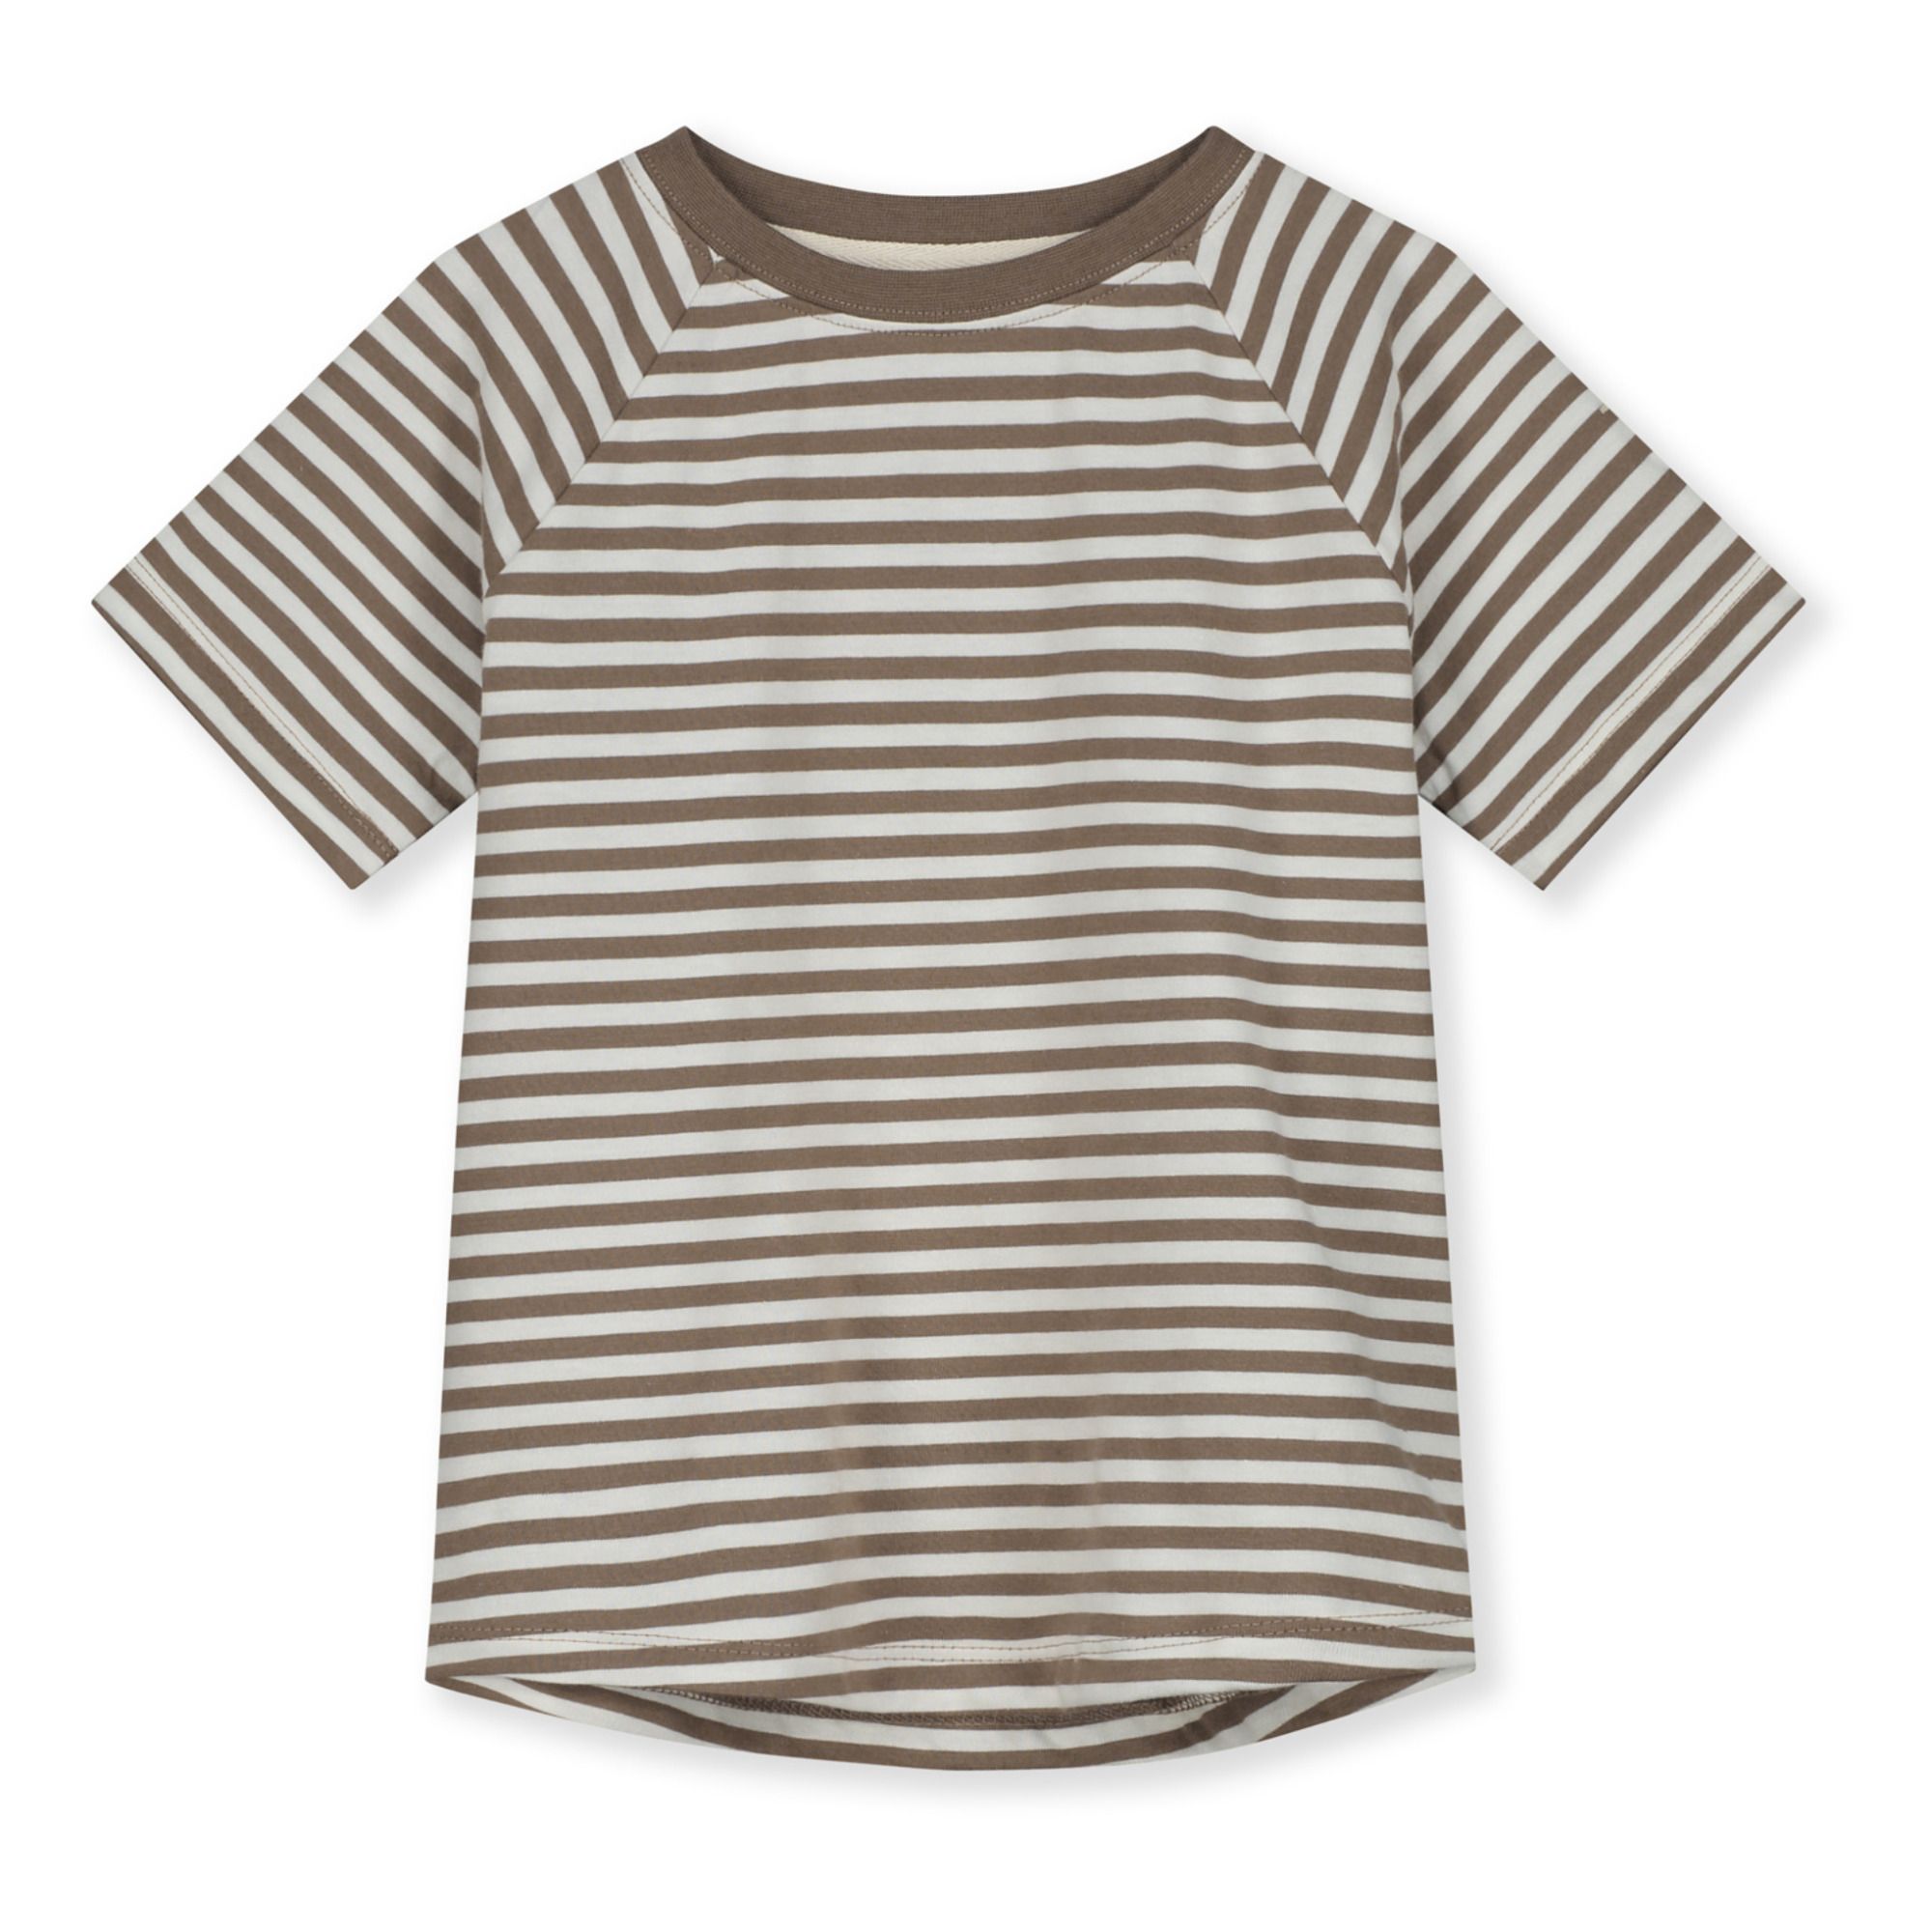 Gray Label - Organic Cotton Striped T-Shirt - Taupe brown | Smallable | Smallable